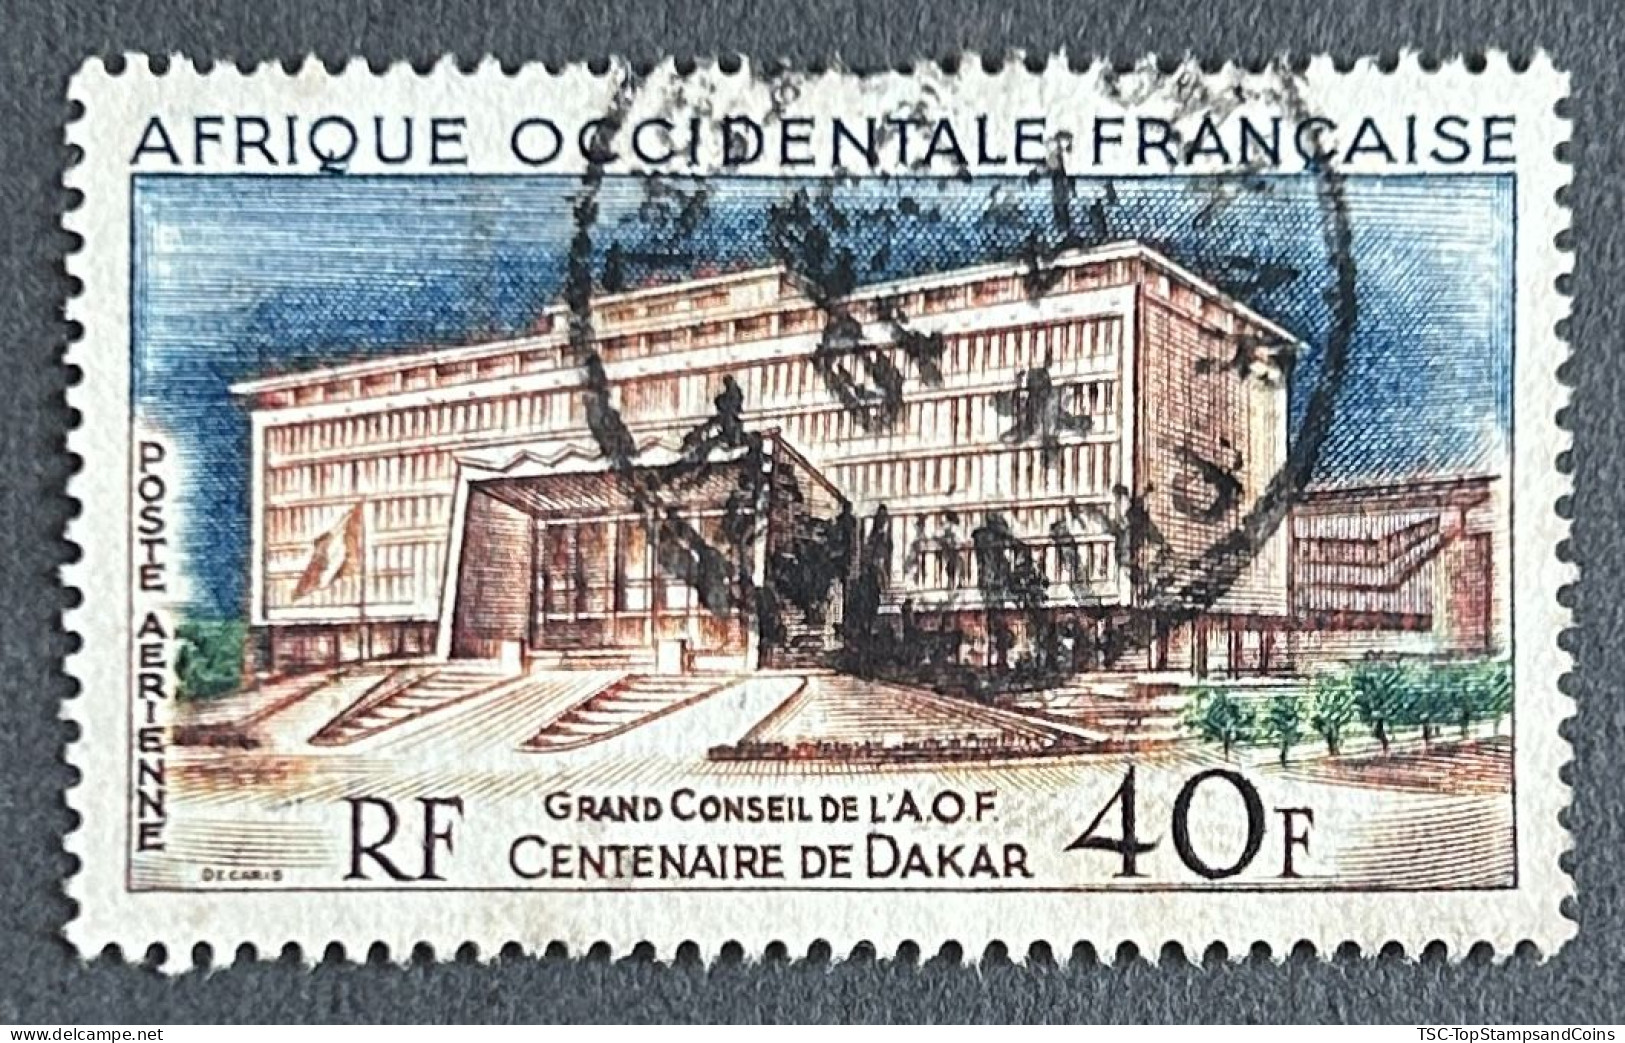 FRAWAPA025U1 - Airmail - Centenary Of Dakar - Palace Of The Grand Council - 40 F Used Stamp - AOF - 1958 - Used Stamps